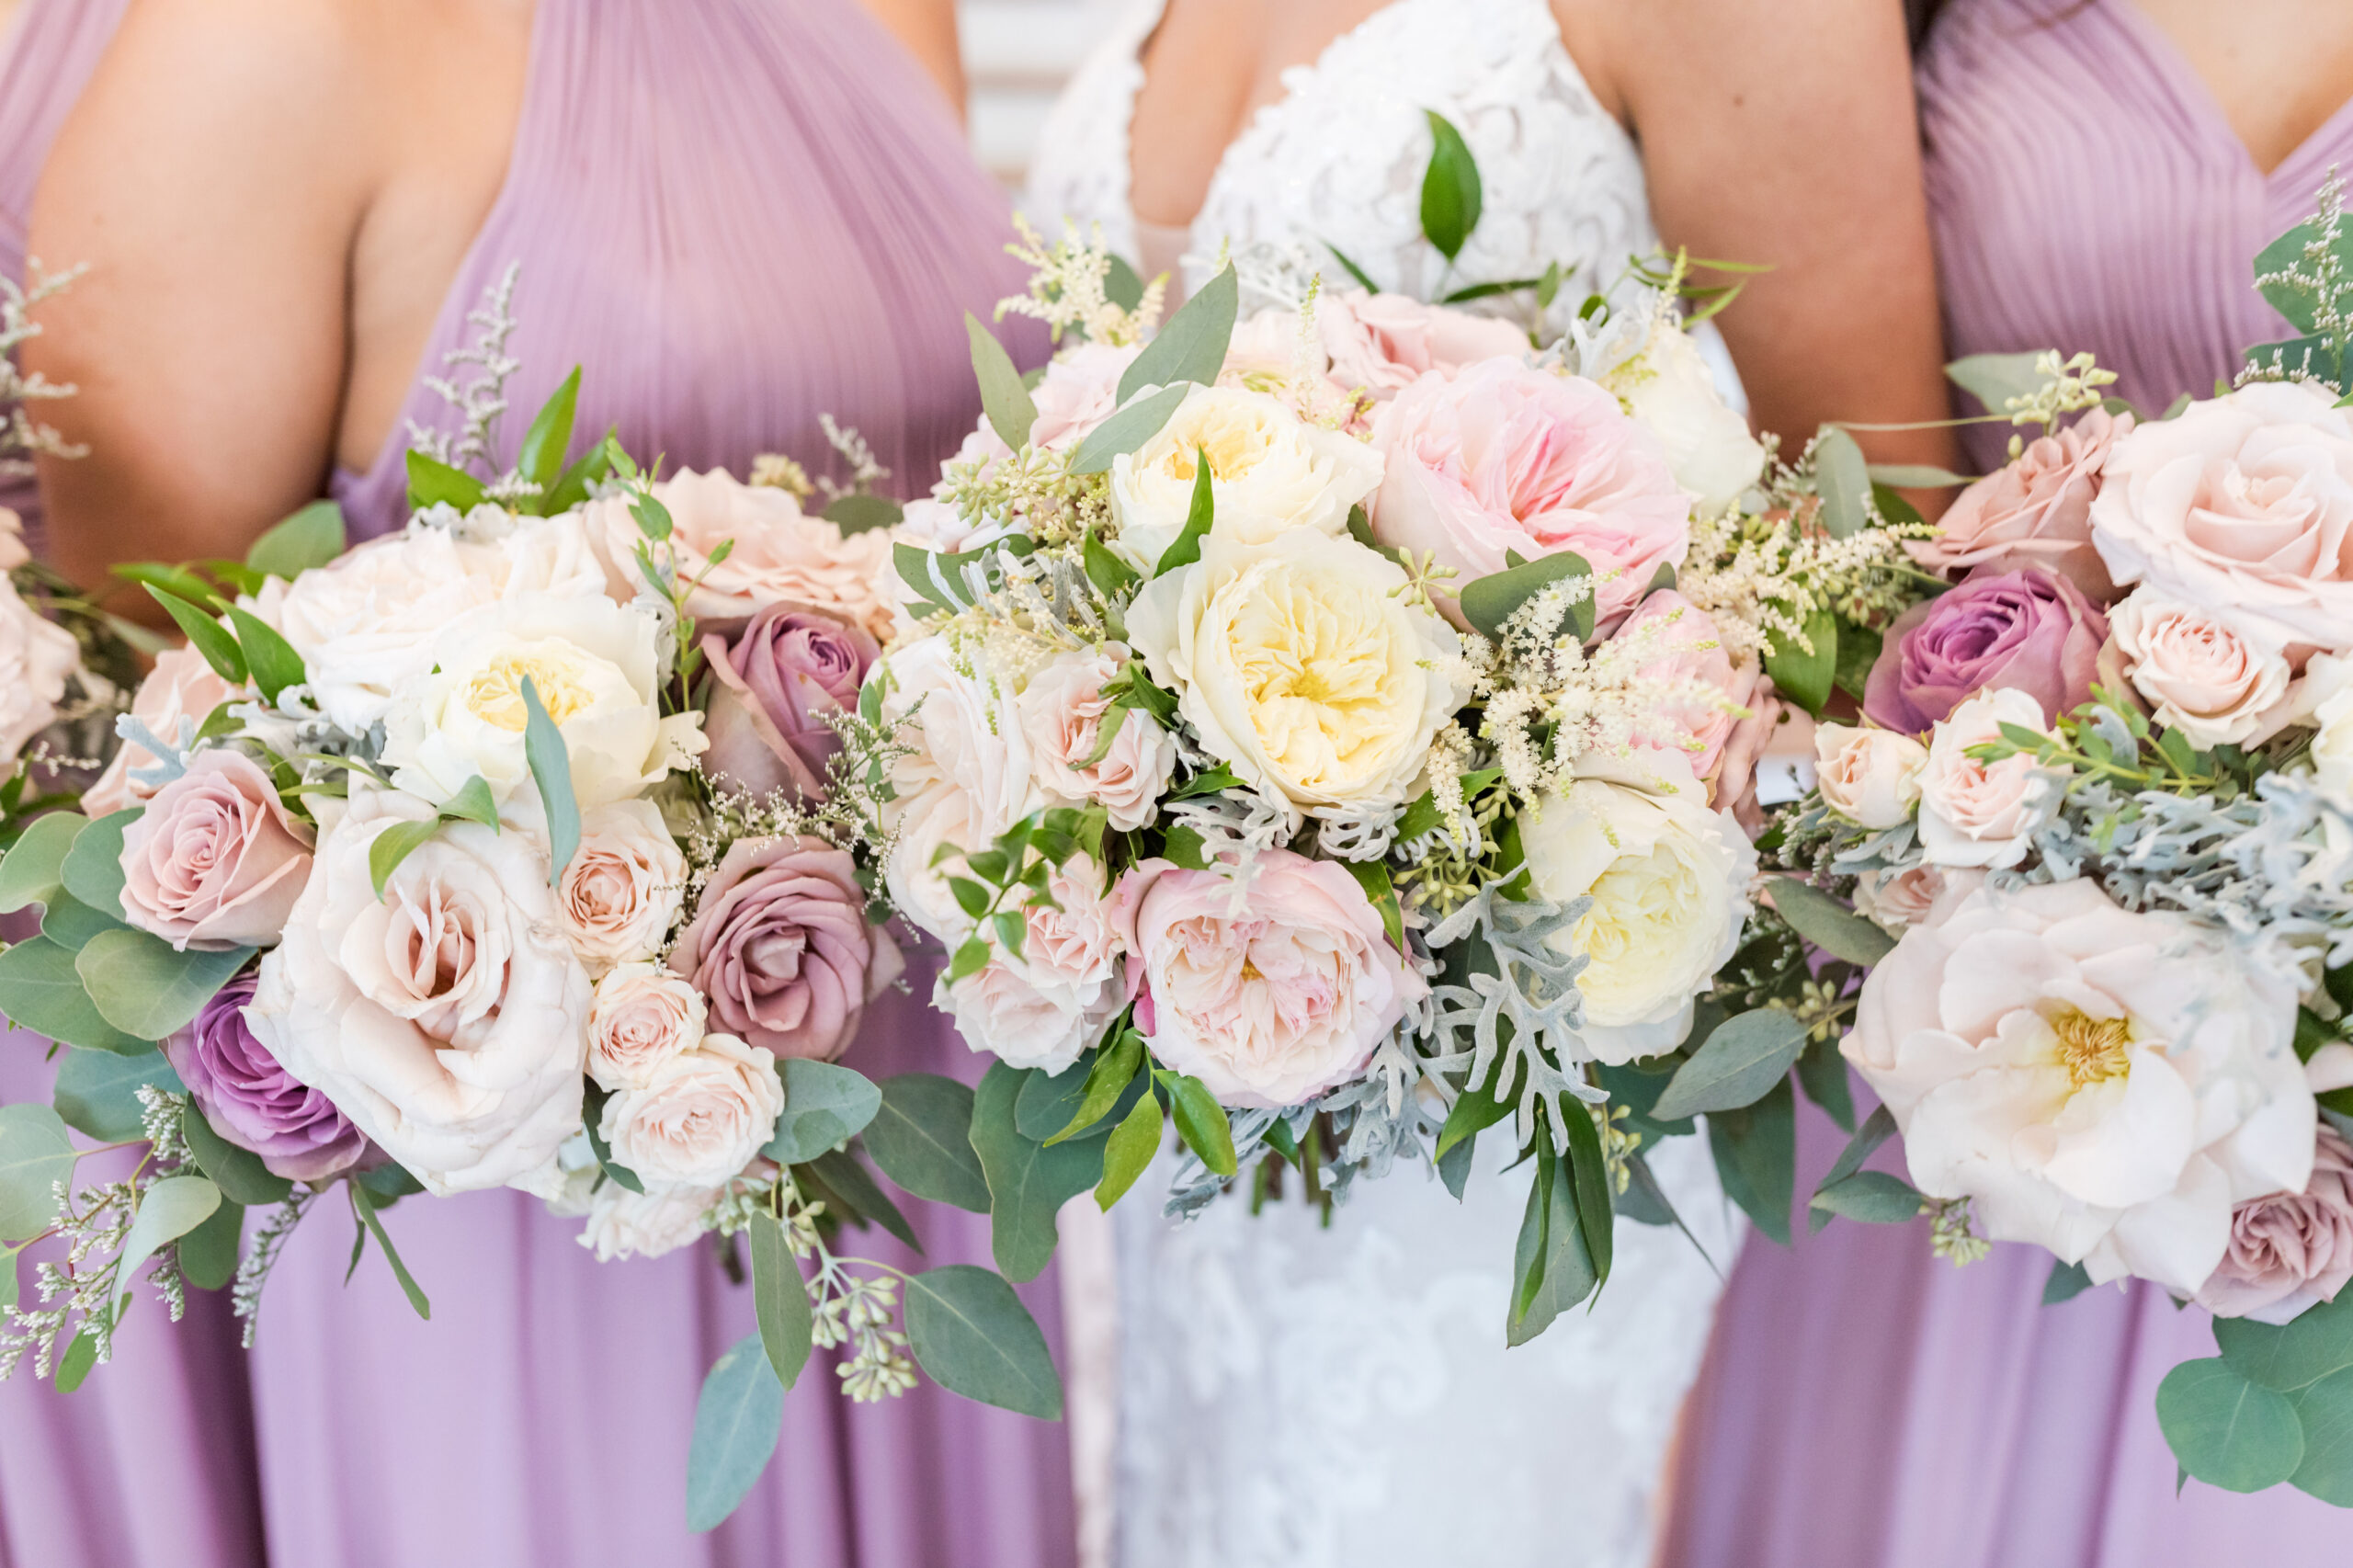 Erin McLarty - Eden's Echo - interview on Thursd - Monica Roberts Photography - wedding and bridesmaids bouquets